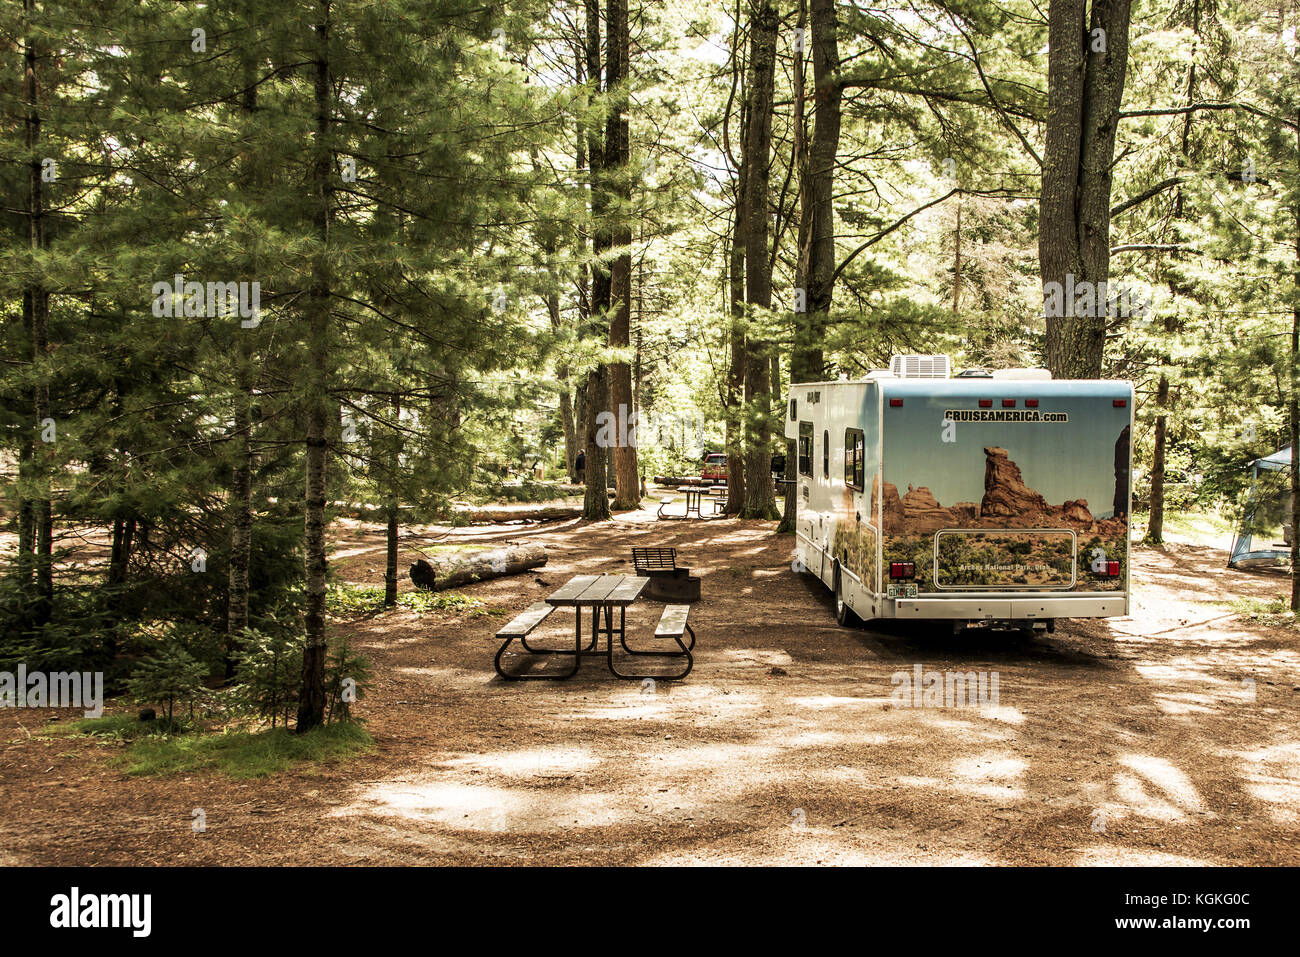 Canada Ontario Algonquin National Park 30.09.2017 - Parked RV camper car at Lake of two rivers Campground Beautiful natural forest Cruise America Stock Photo